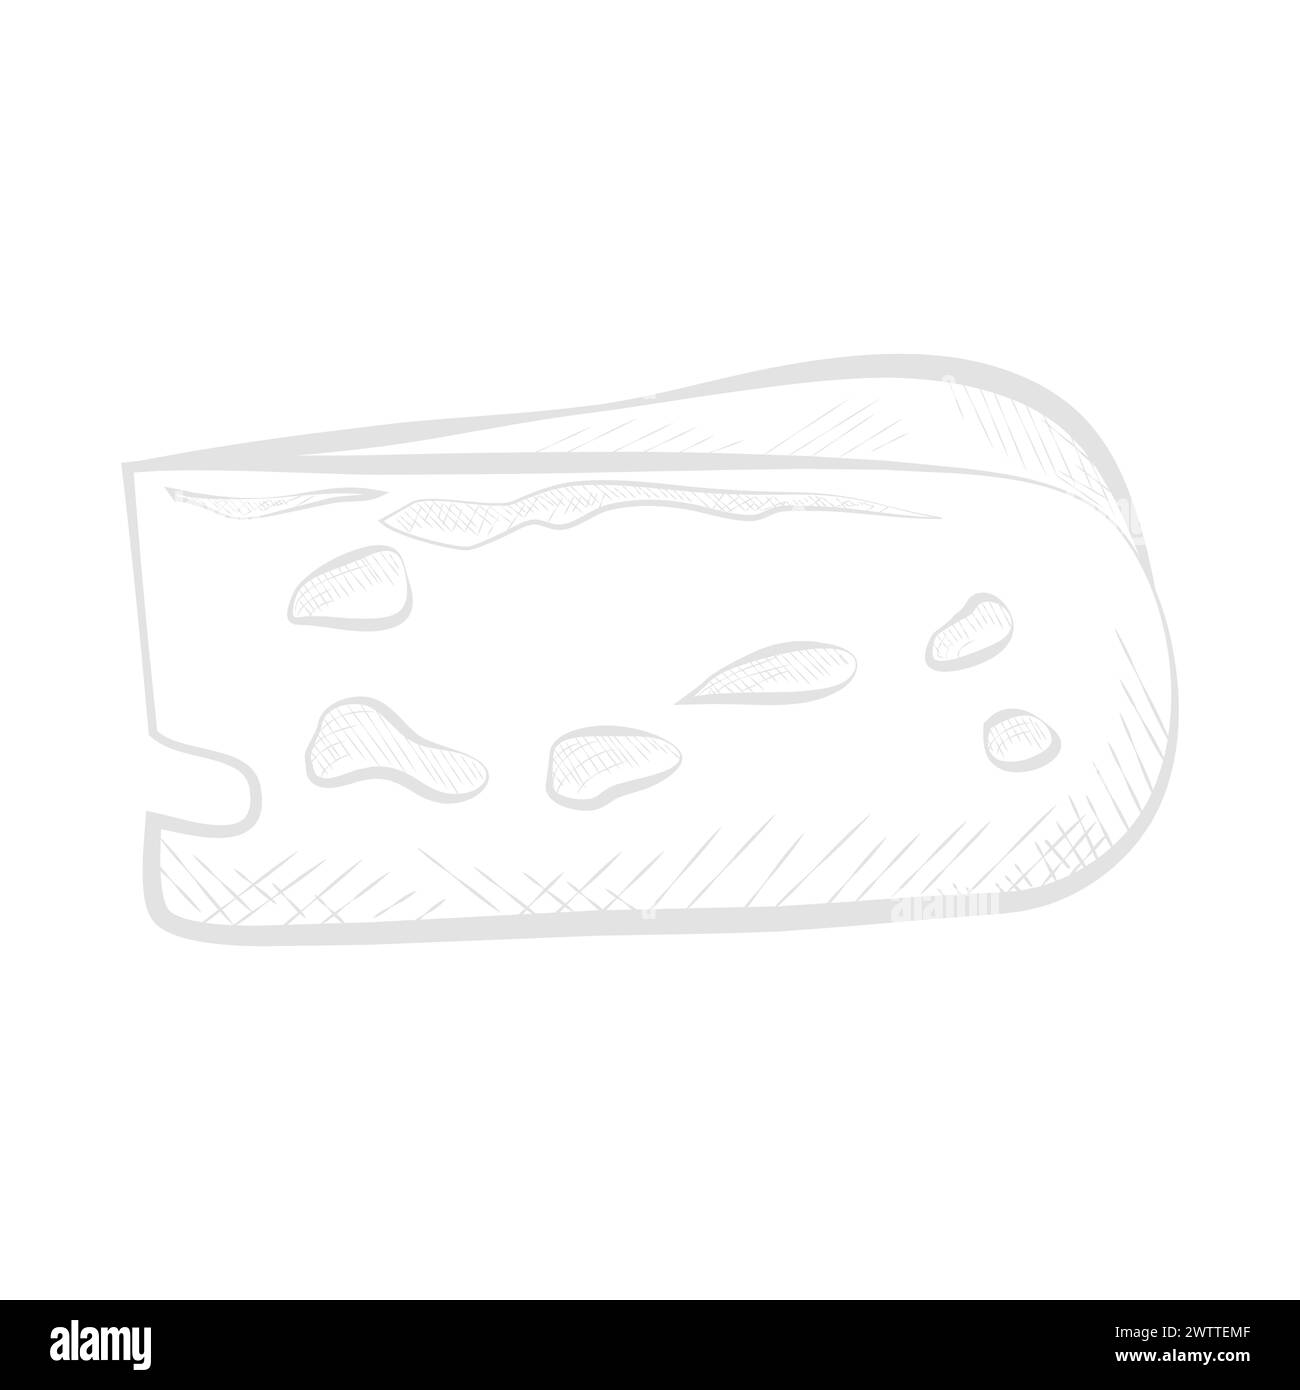 Slice of cheese, triangle shape piece with holes, line sketch dairy product vector illustration Stock Vector